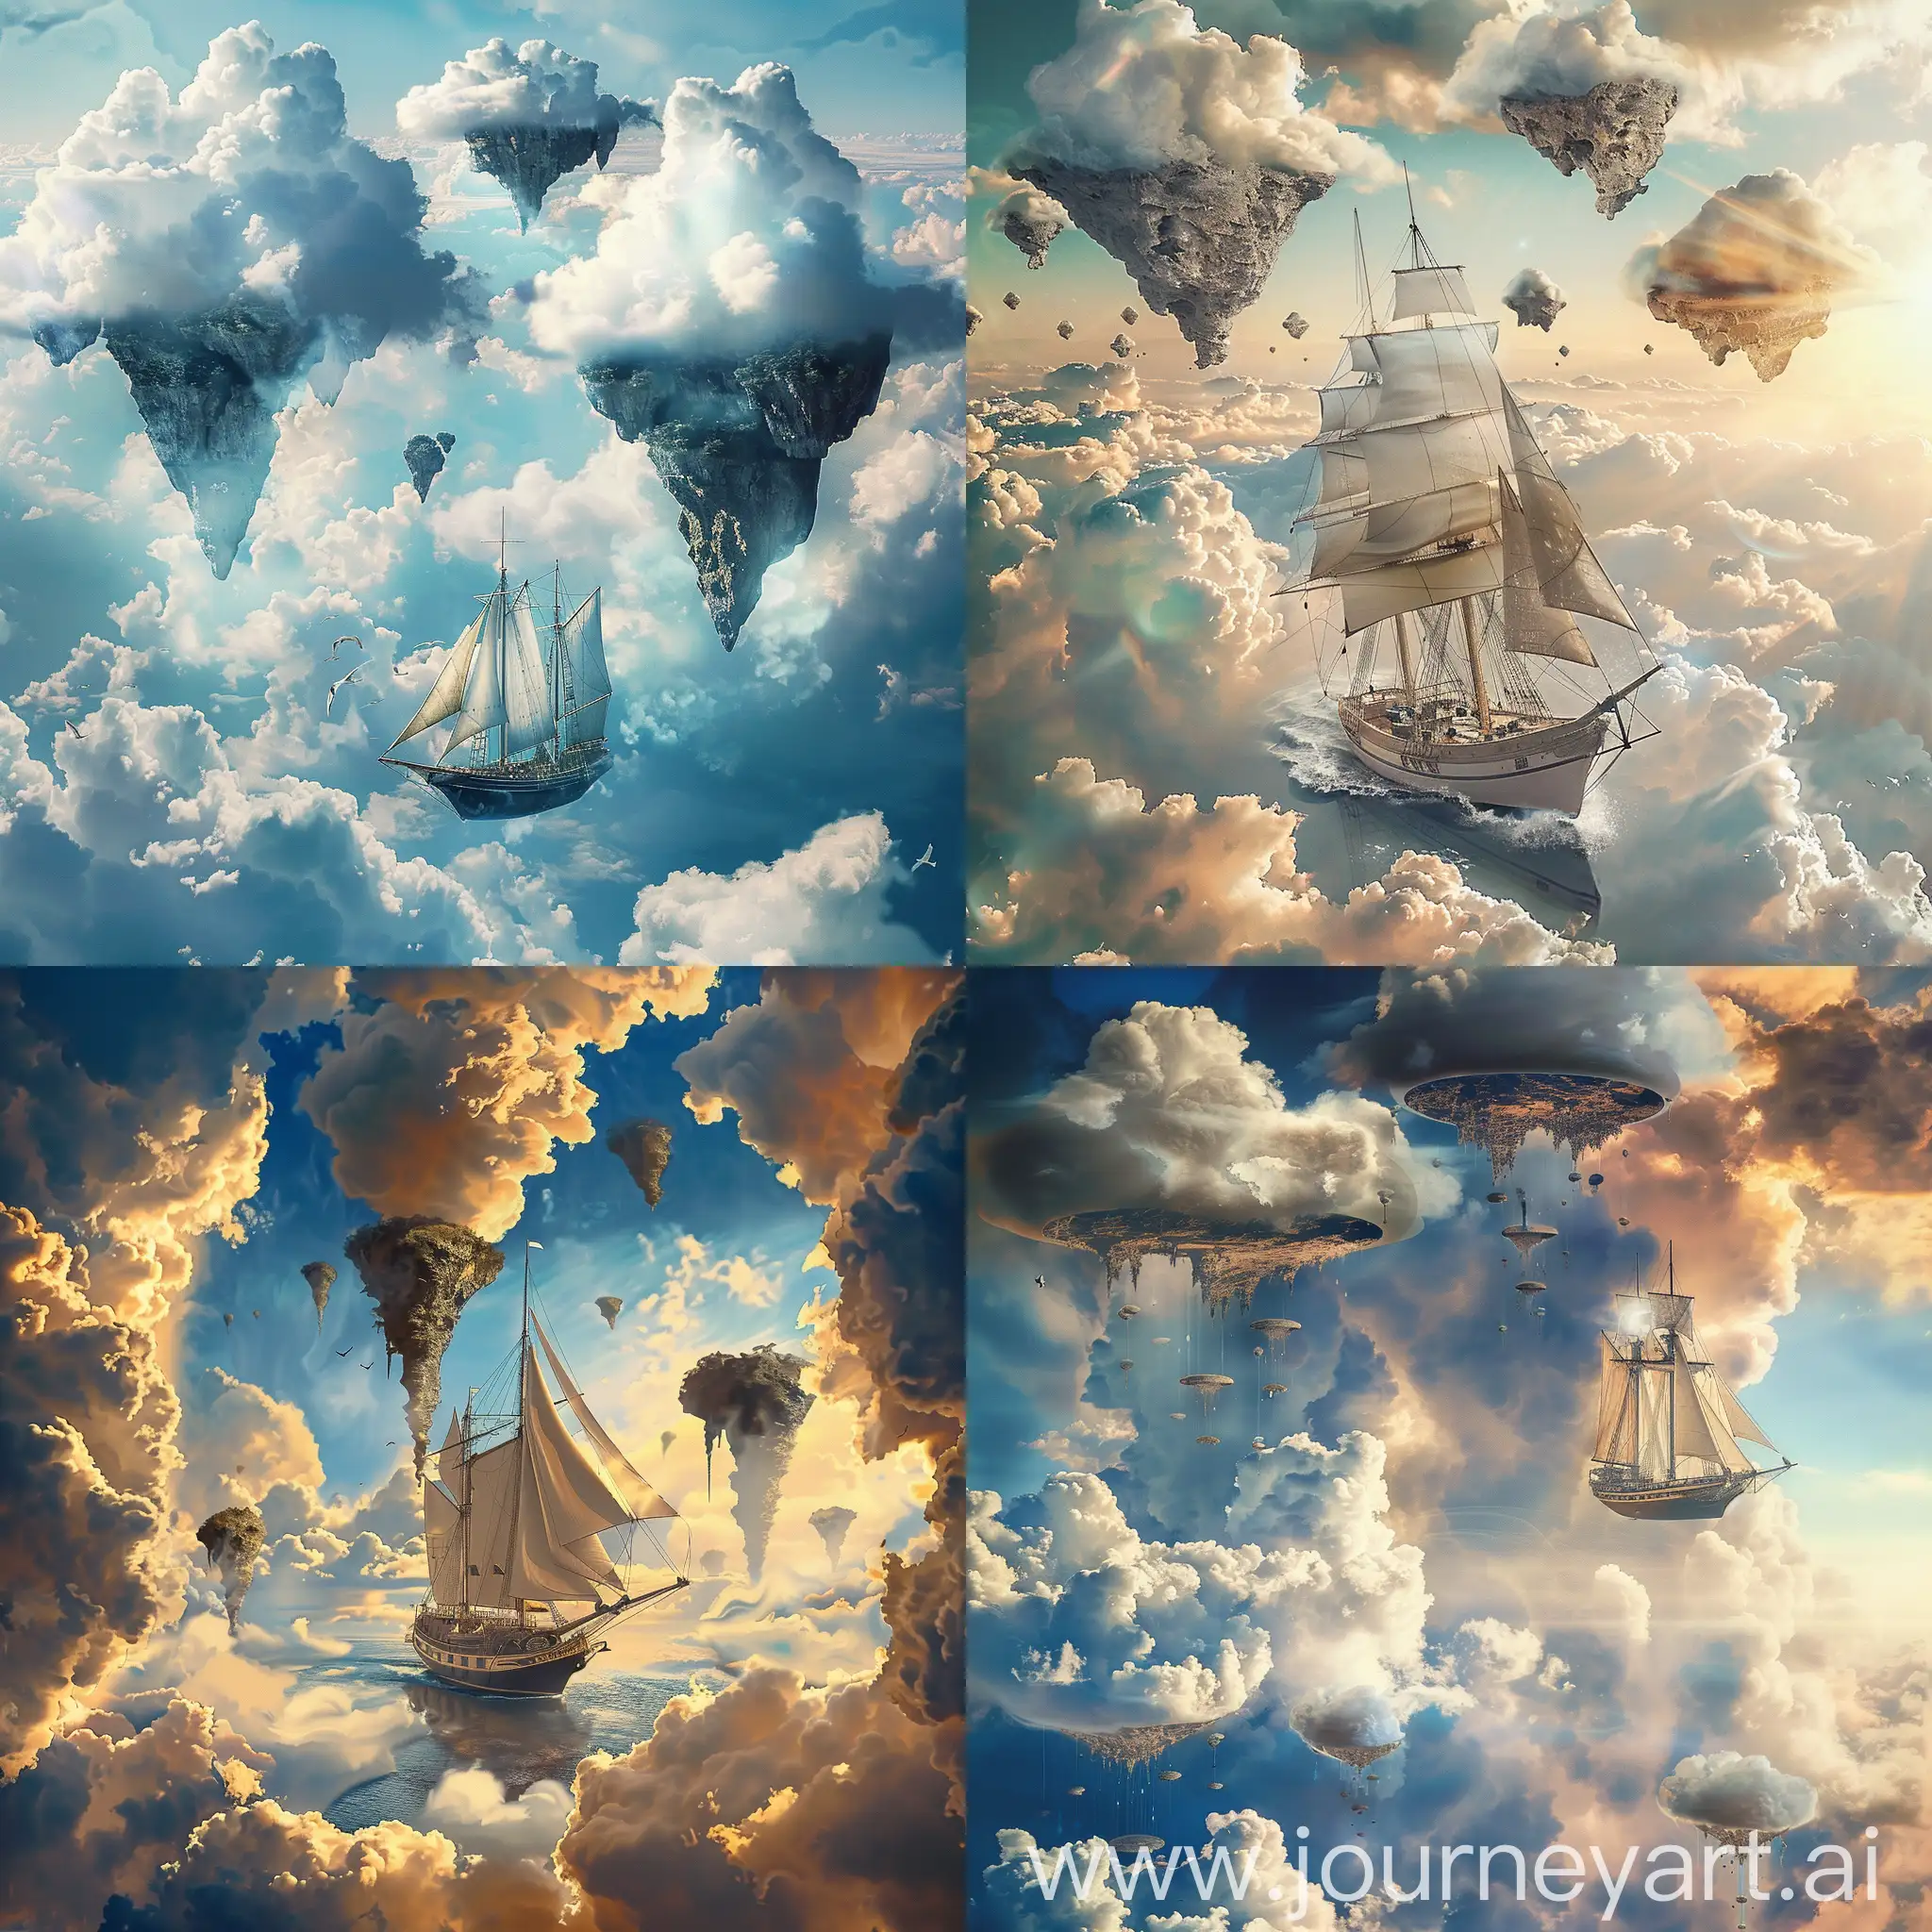 Design an image of a sailing ship navigating through clouds in a sky filled with floating islands